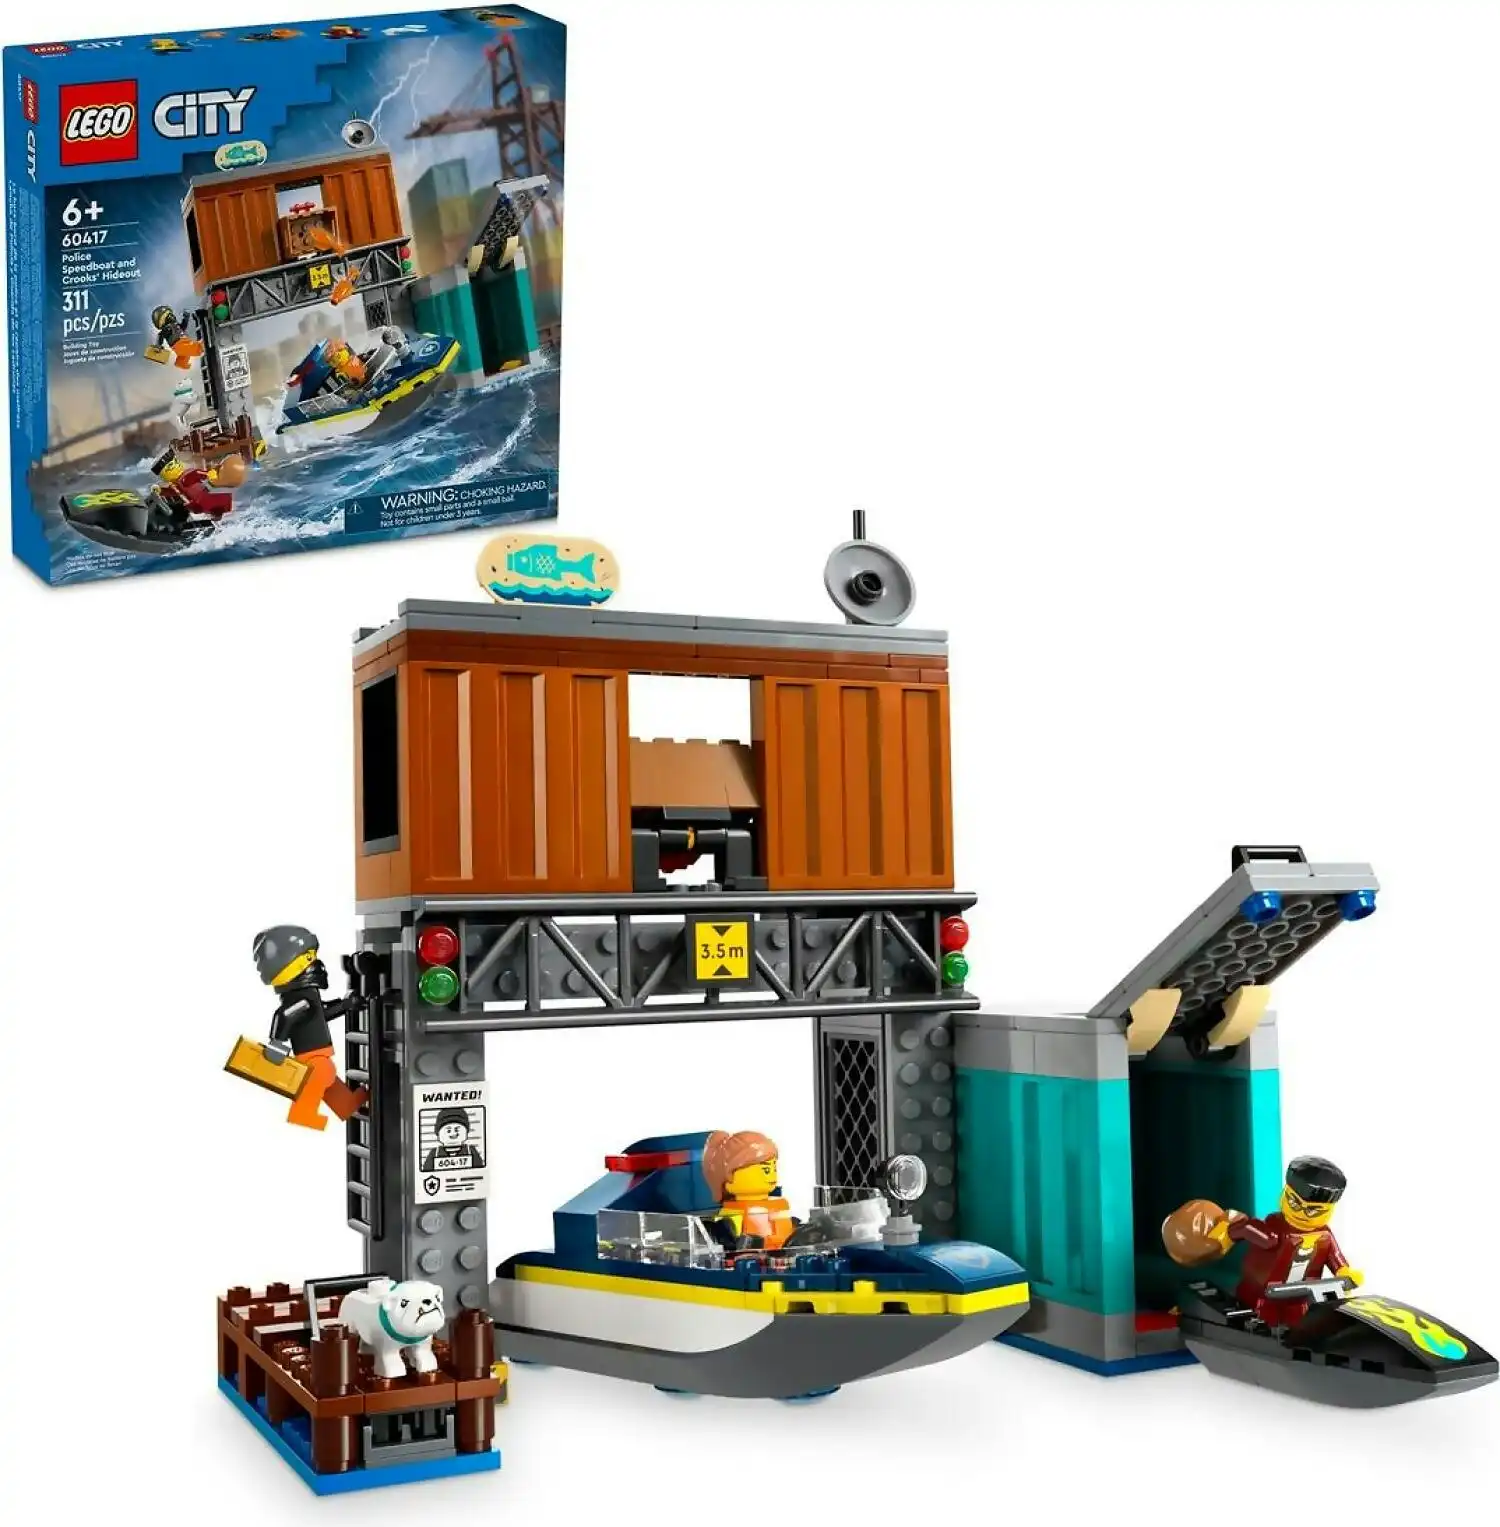 LEGO 60417 Police Speedboat and Crooks Hideout - City